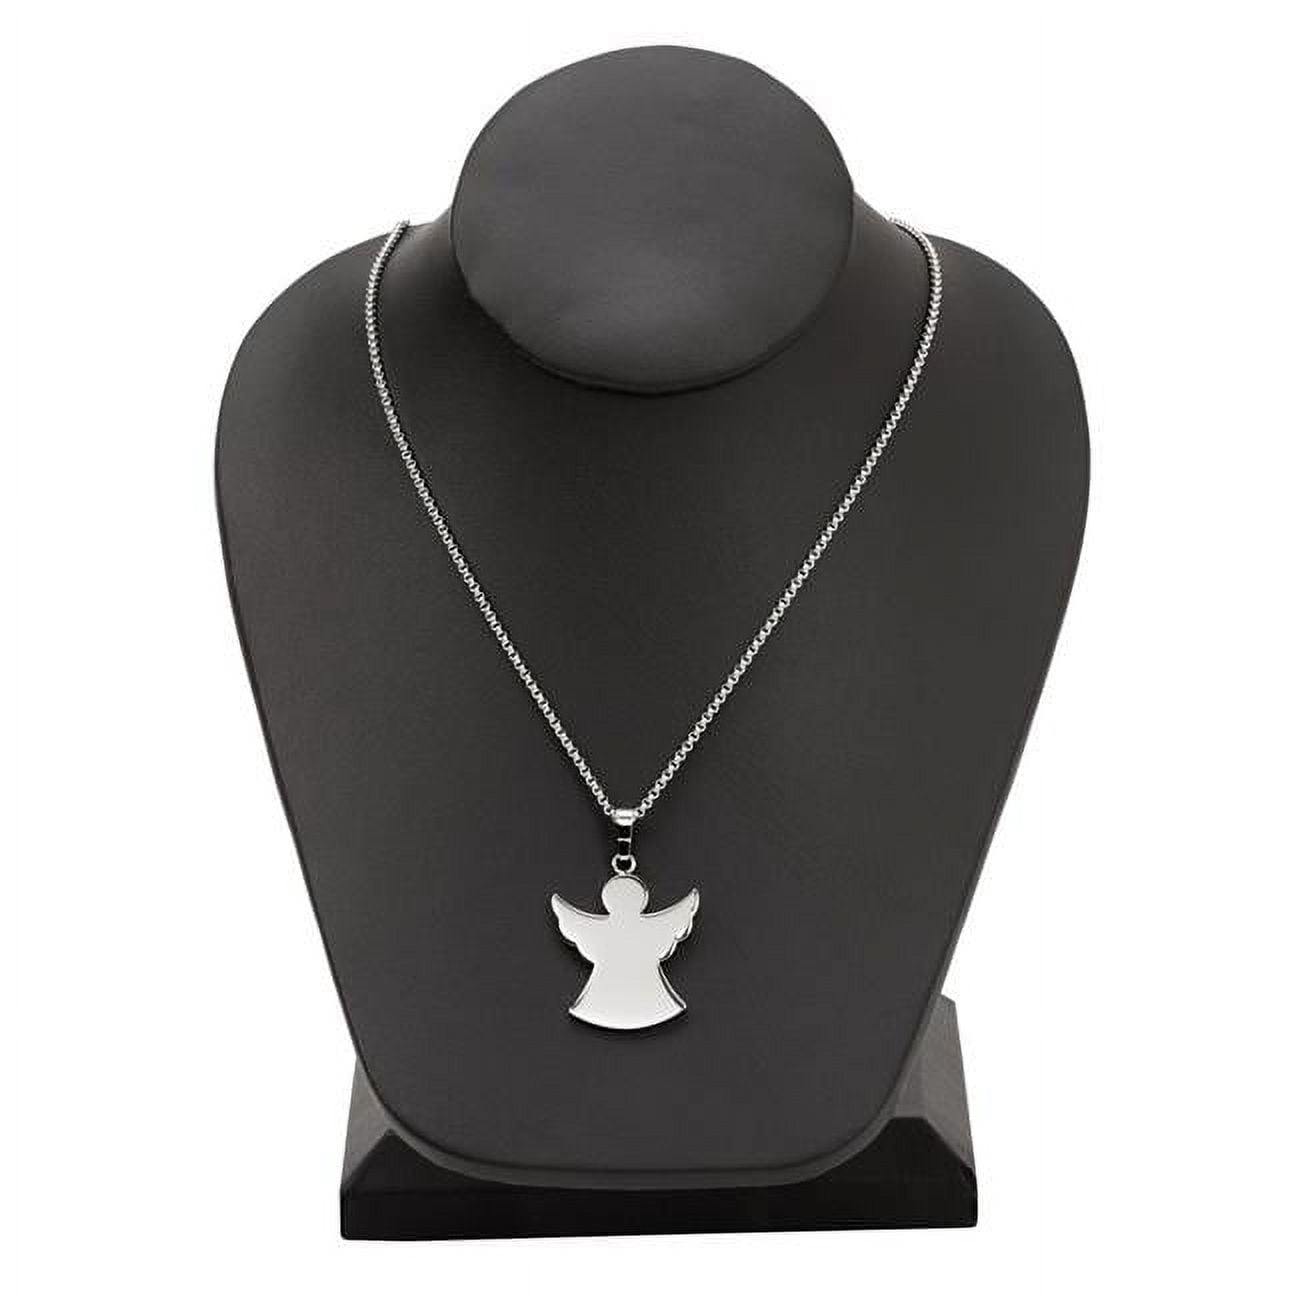 002459 1.13 X 1.13 In. Stainless Steel Angel Necklace With 18 In. Chain